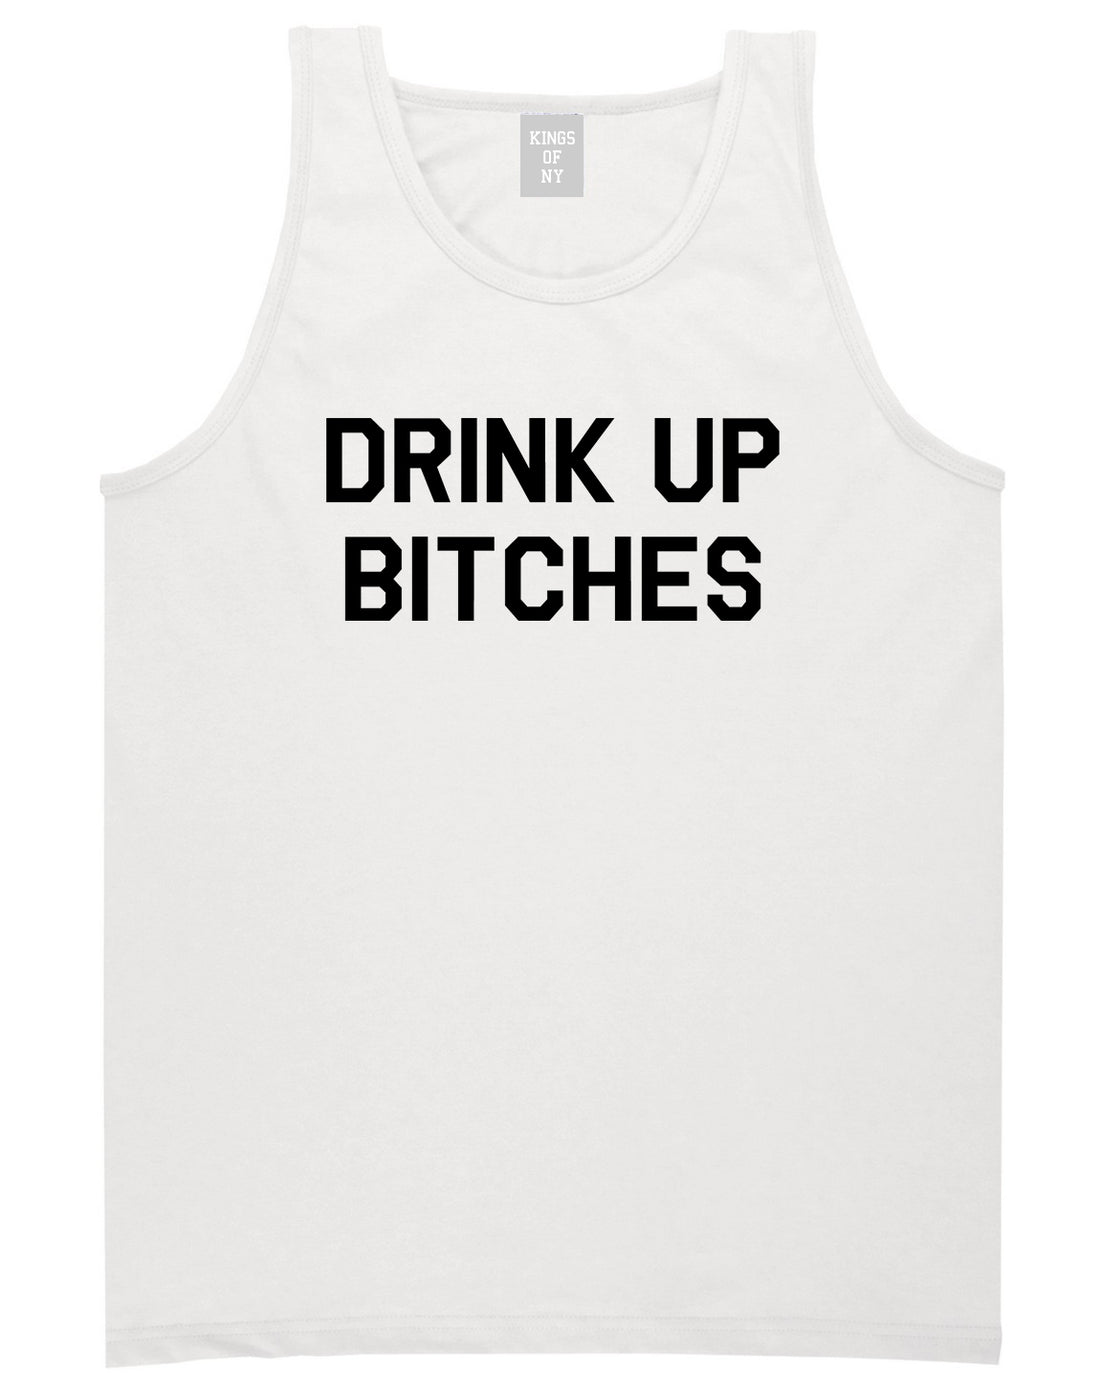 Drink_Up_Bitches Mens White Tank Top Shirt by Kings Of NY